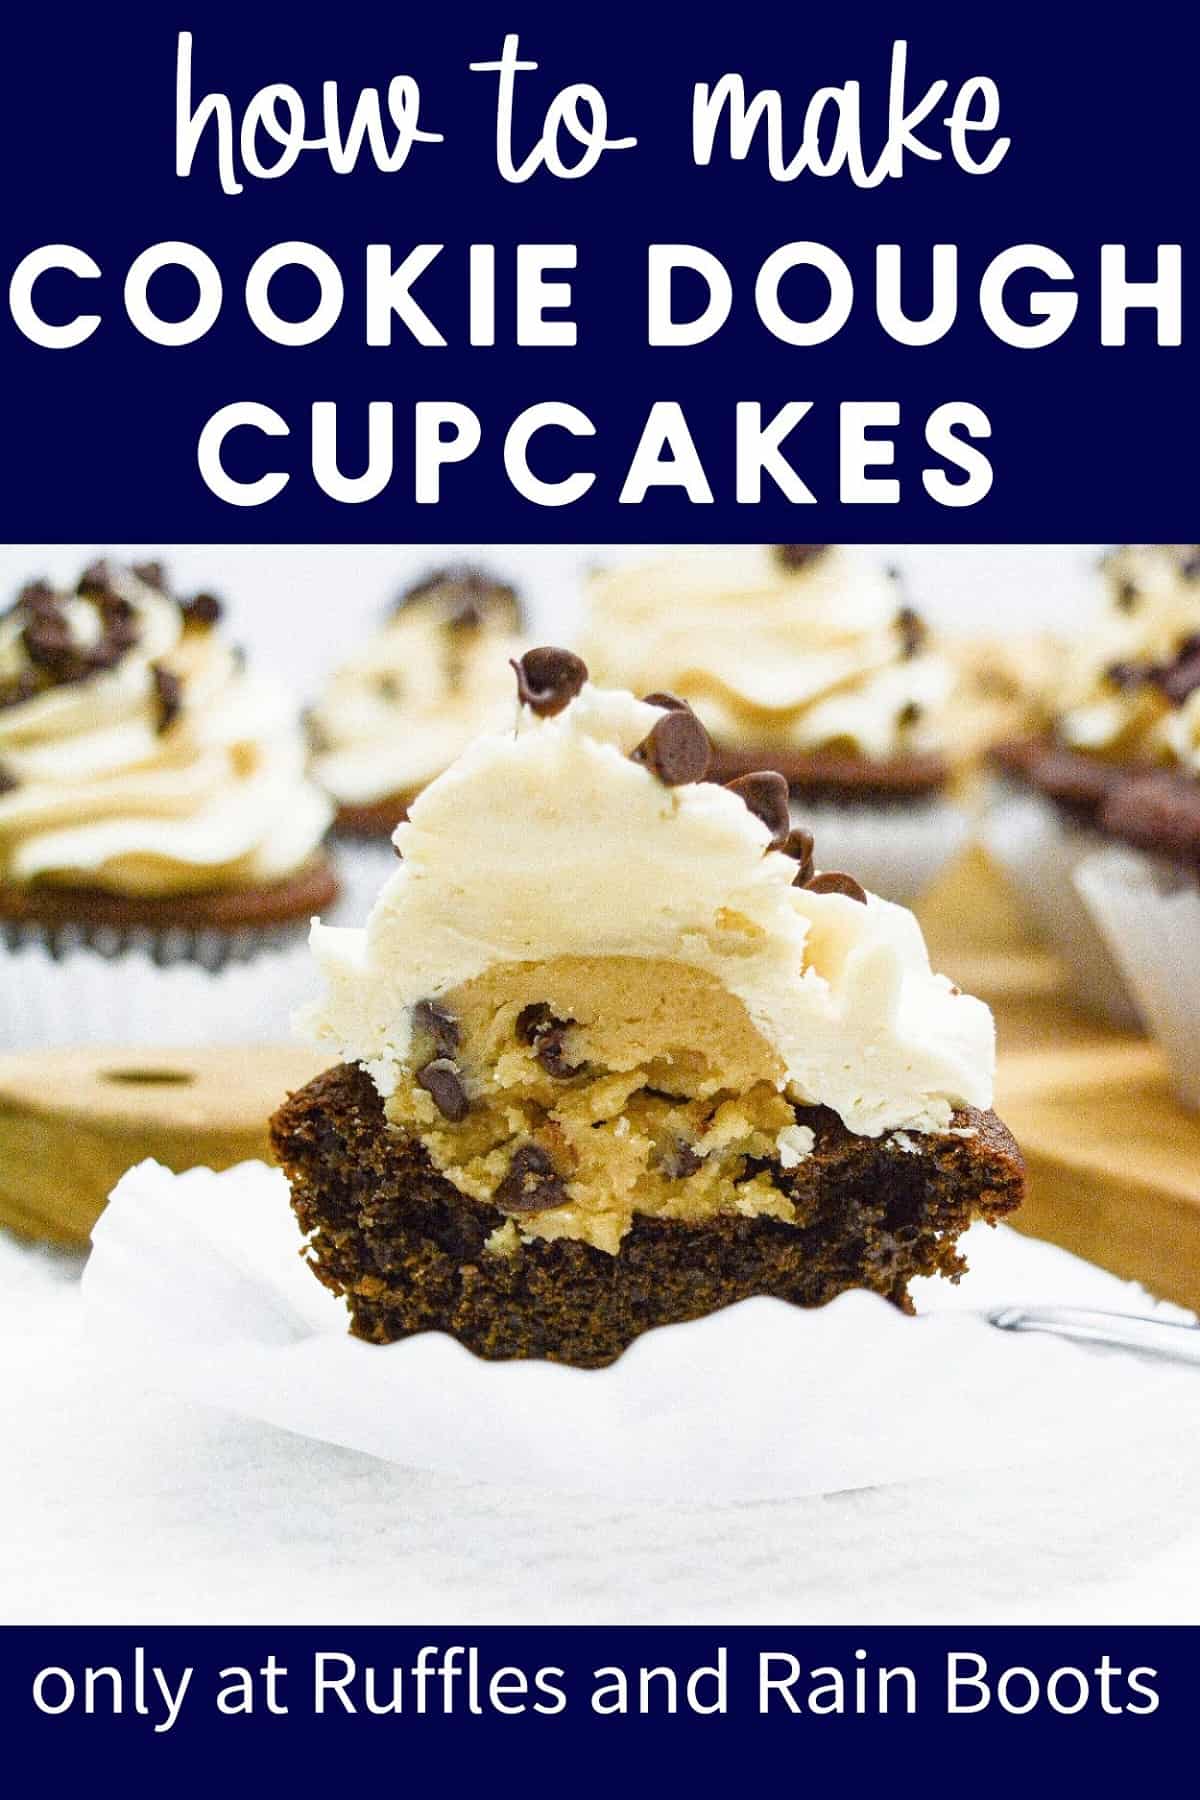 A vertical close up of a frosted cookie dough cupcake that has been cut in half, next to a wooden cutting board, surrounded with more cupcakes.